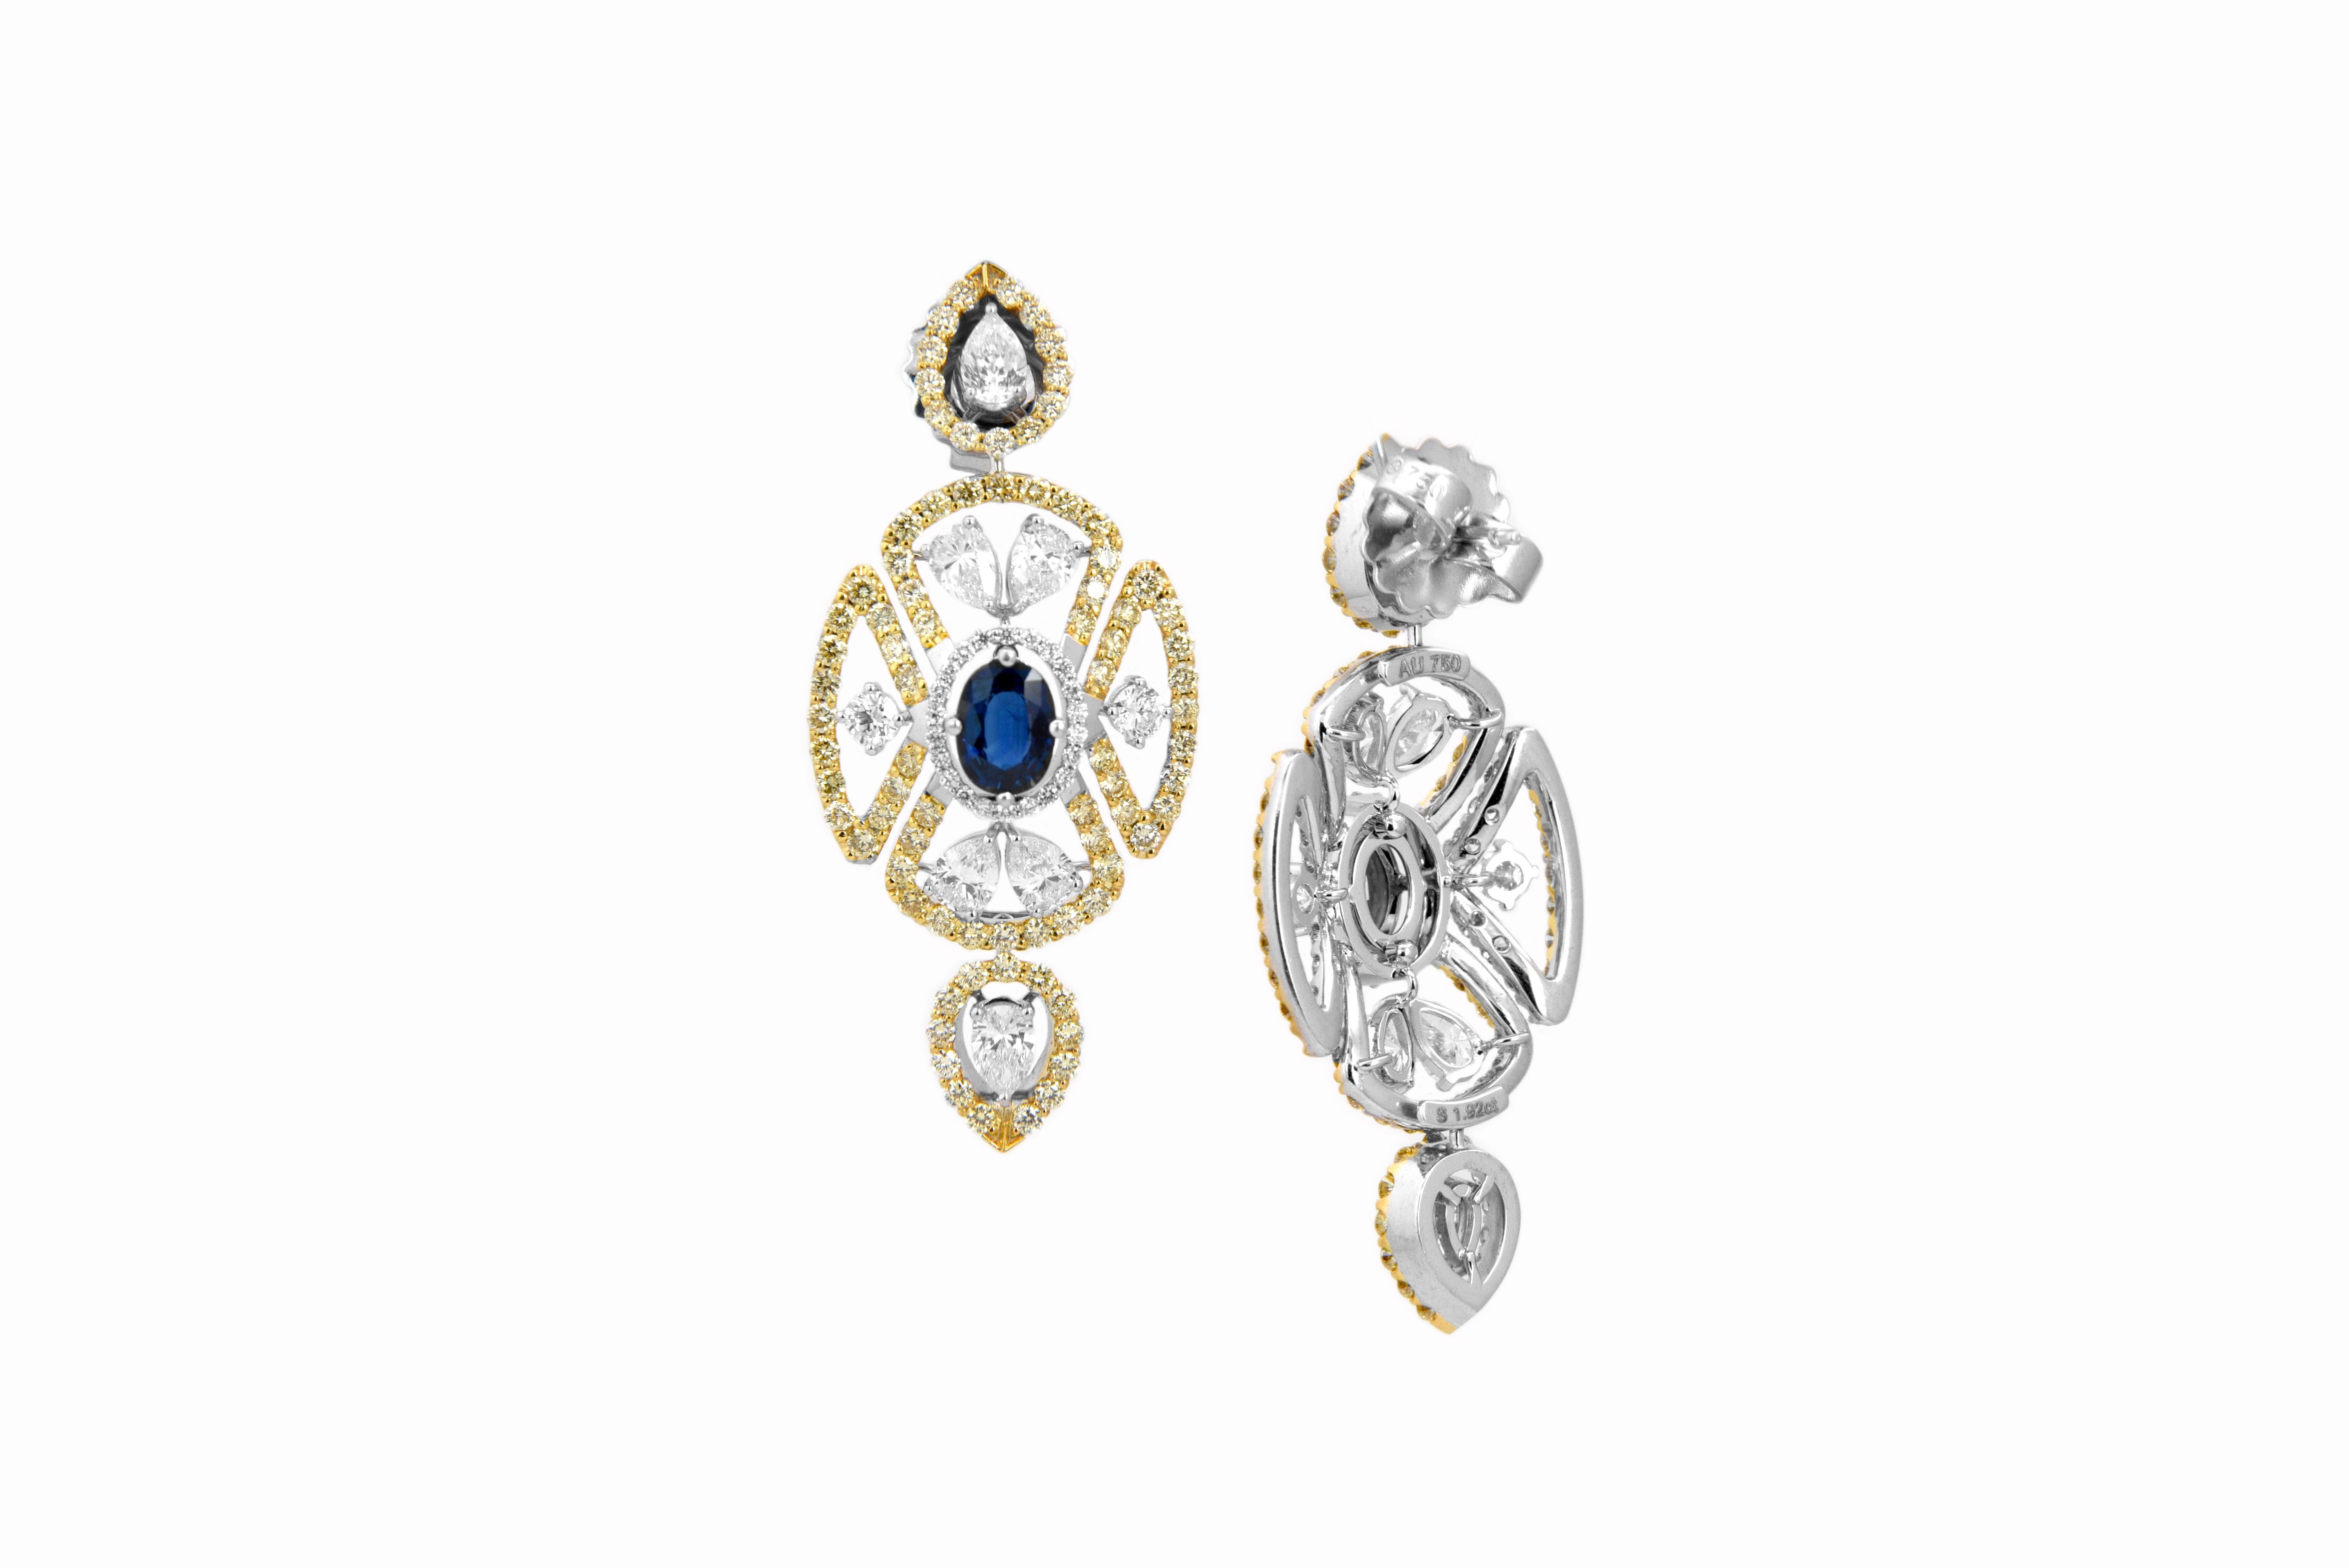 This classical yet modern earring is perfect for a night out. This earring contains 1.92Carats of oval cut sapphires, and 6.72 carats of VVS quality diamonds.